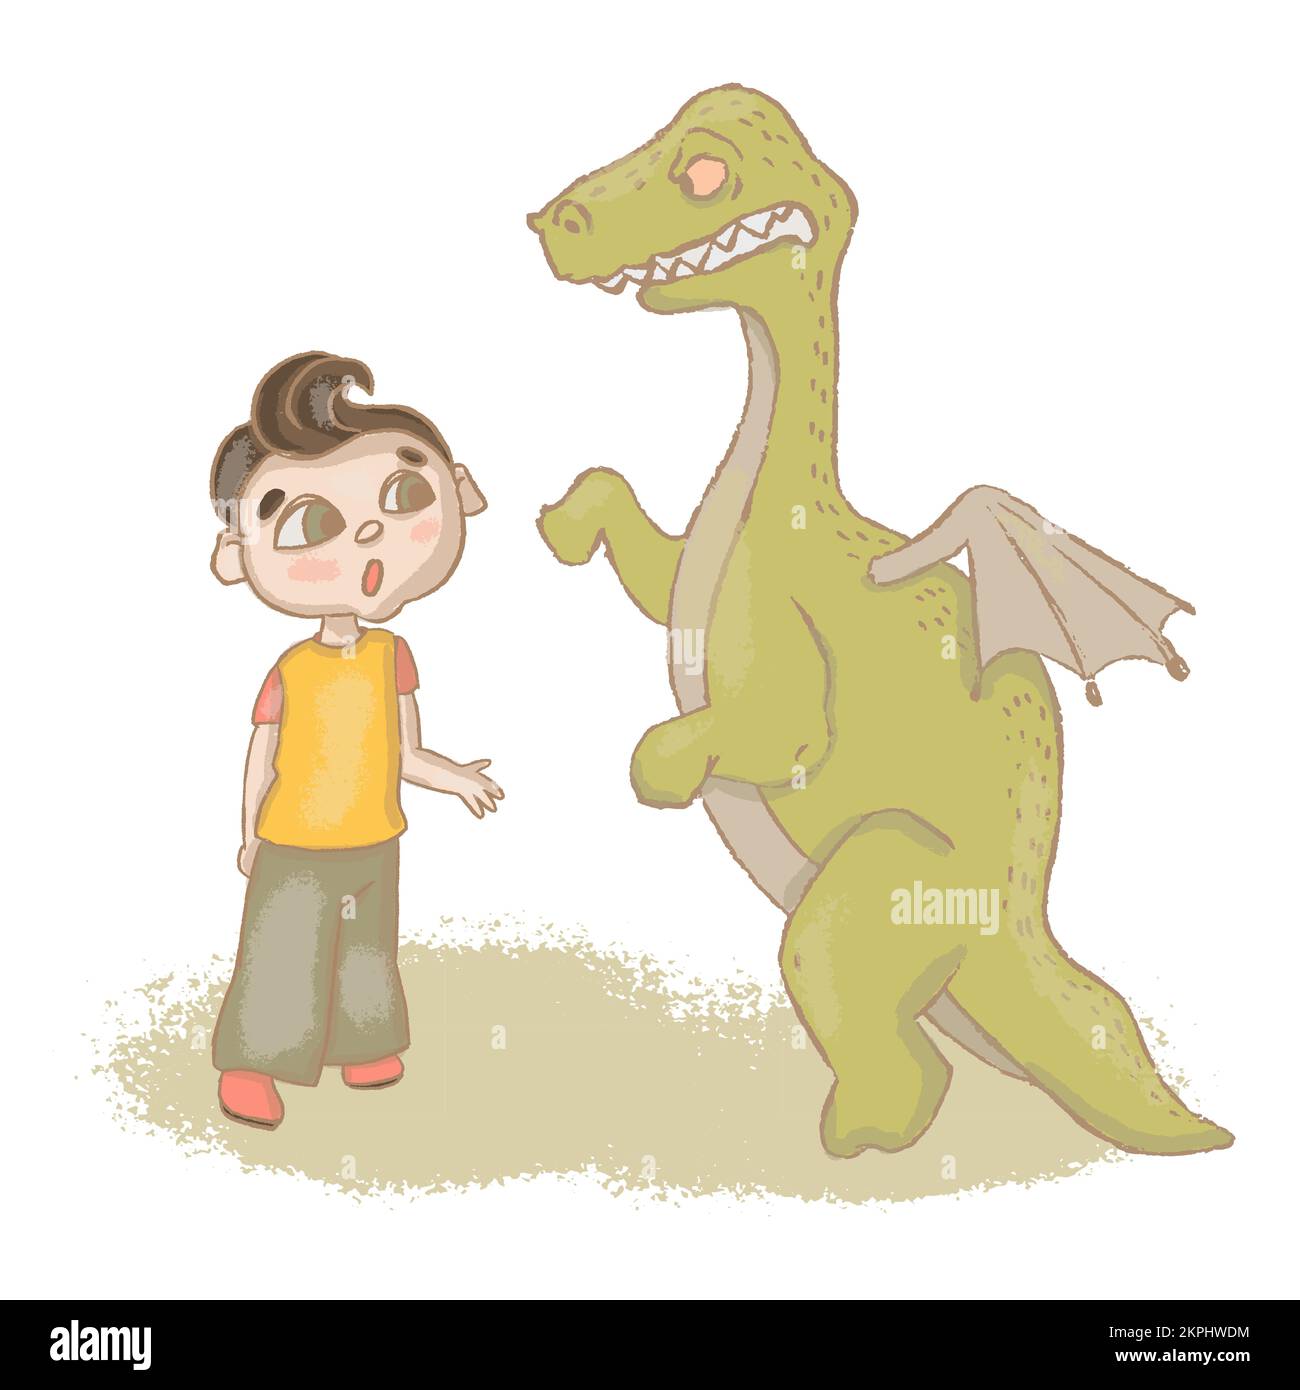 WHATS UP Boy And Dinosaur Talking Picture In Grunge Style Hand Drawn Sketch Emotional Characters Cartoon Clip Art Vector Illustration For Print Stock Vector